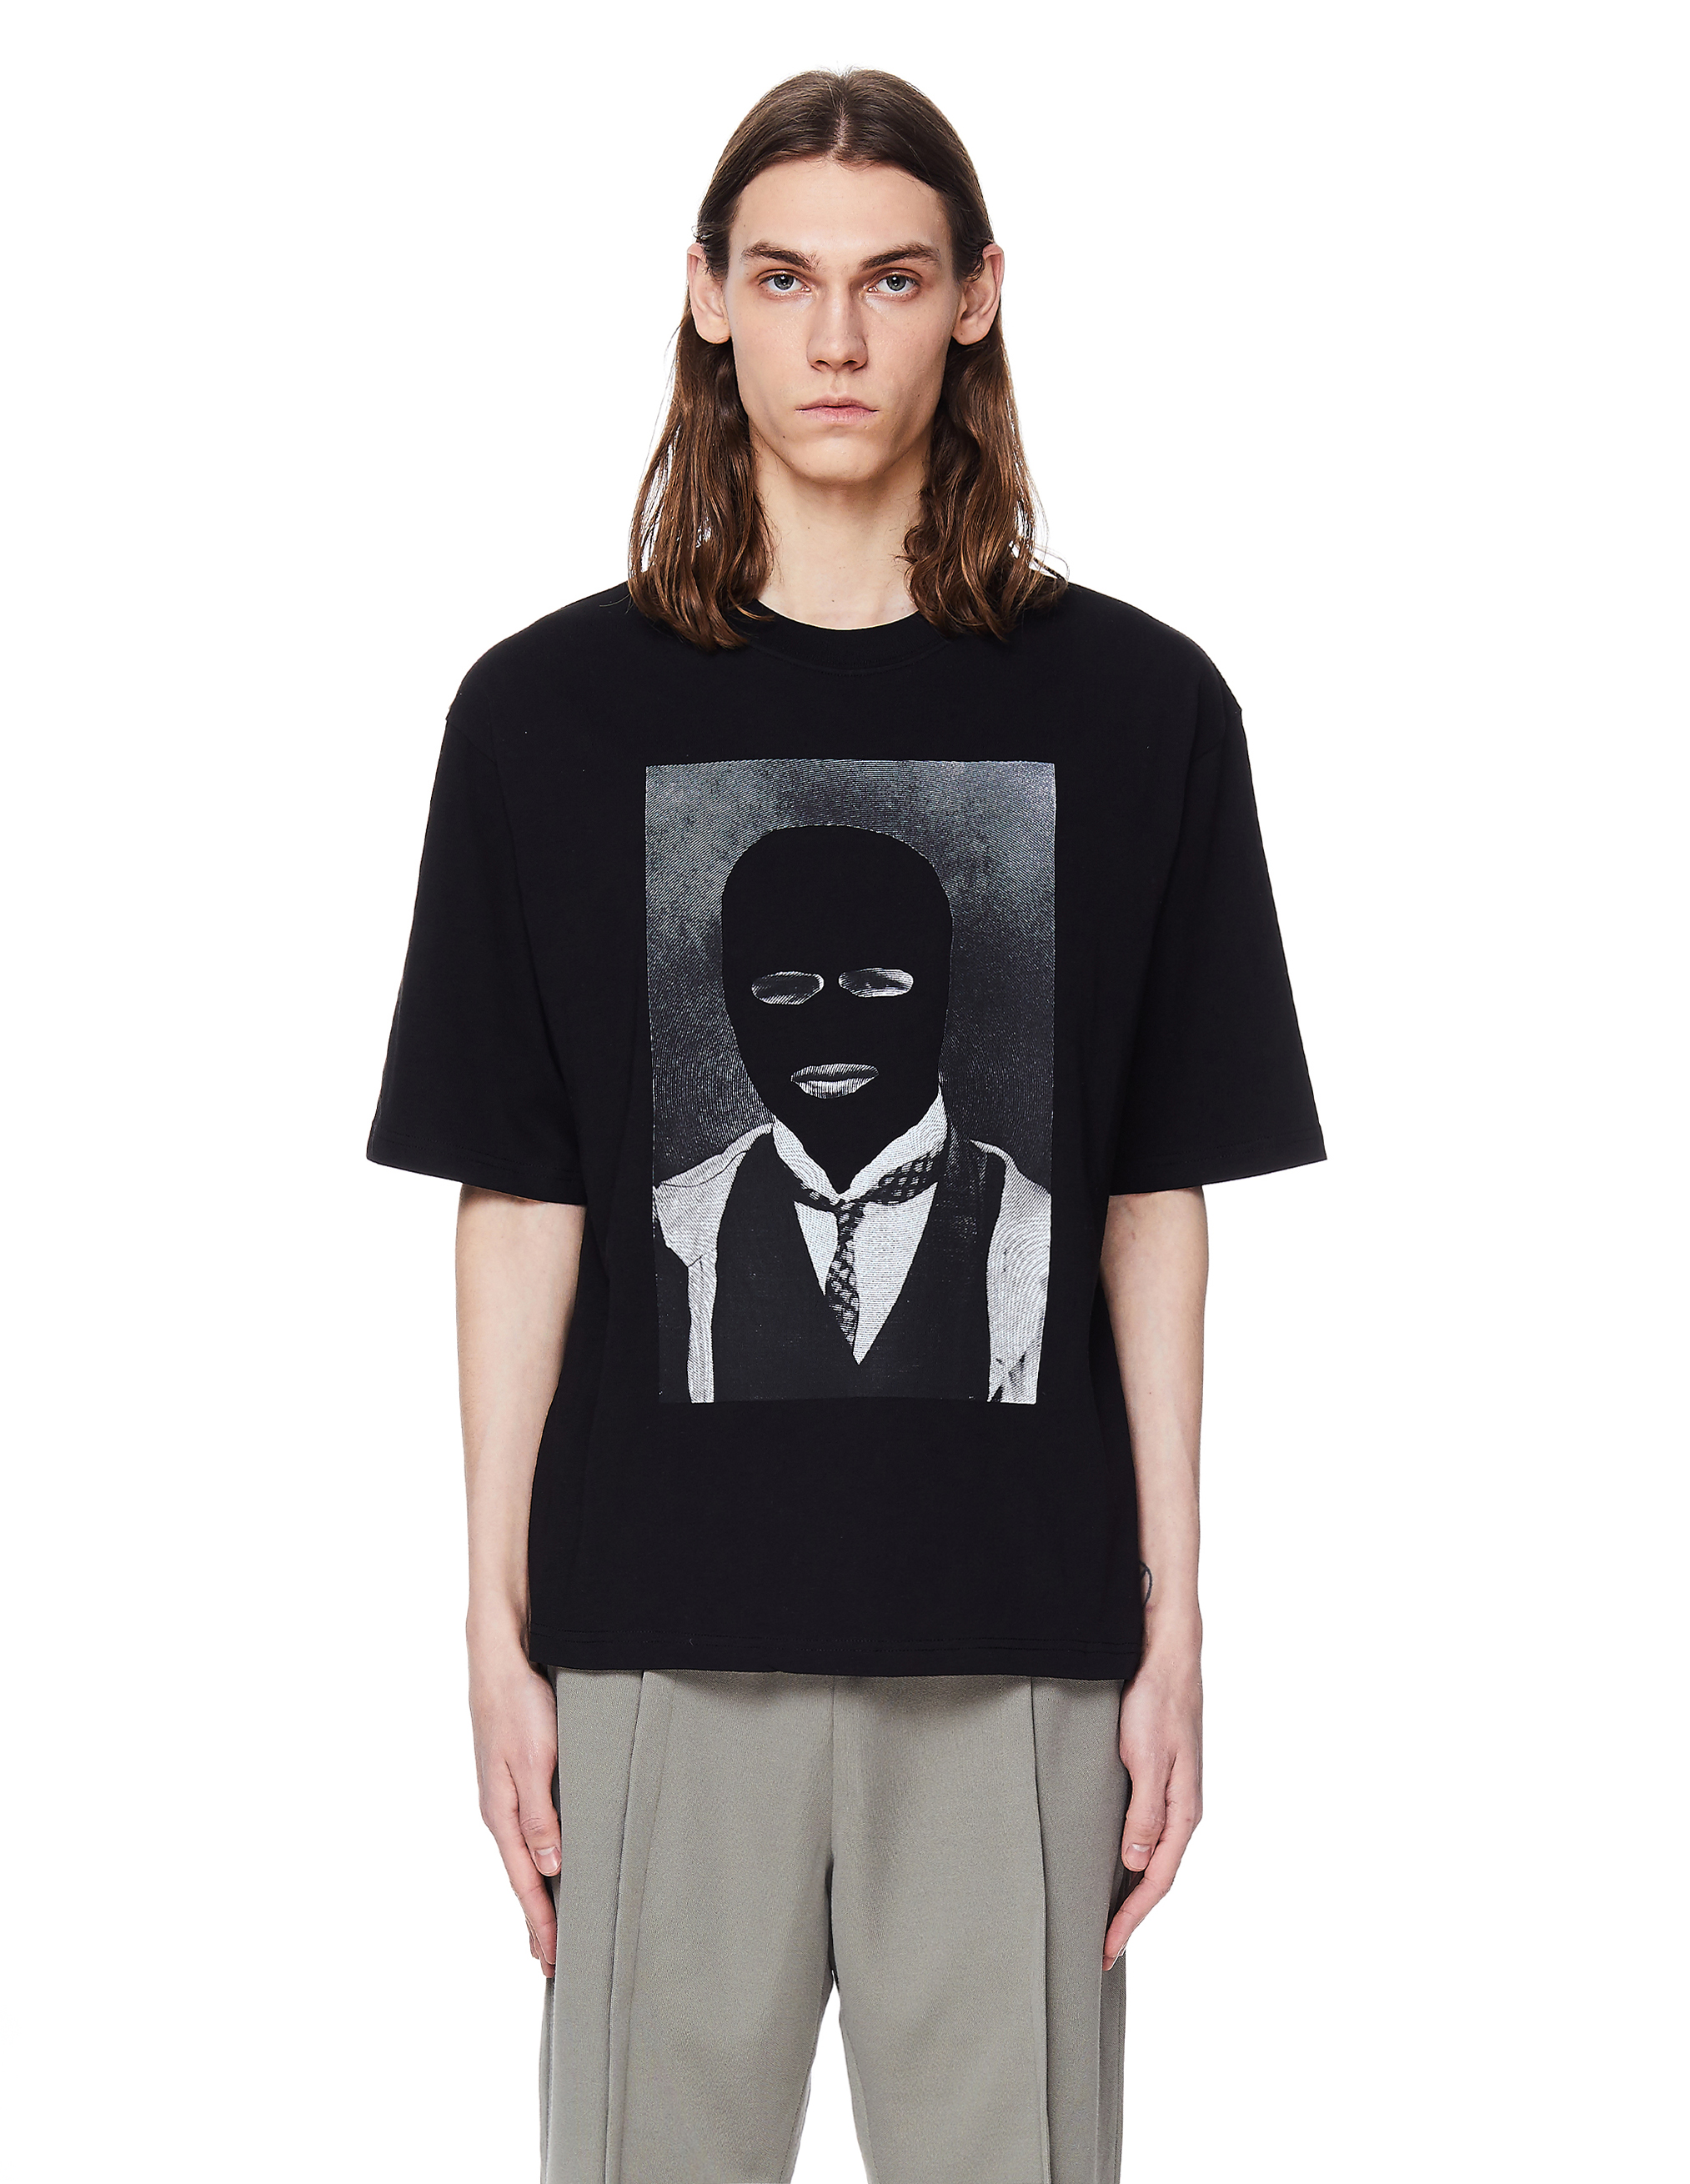 Buy Youths in Balaclava men black cotton printed t-shirt for $90 online ...